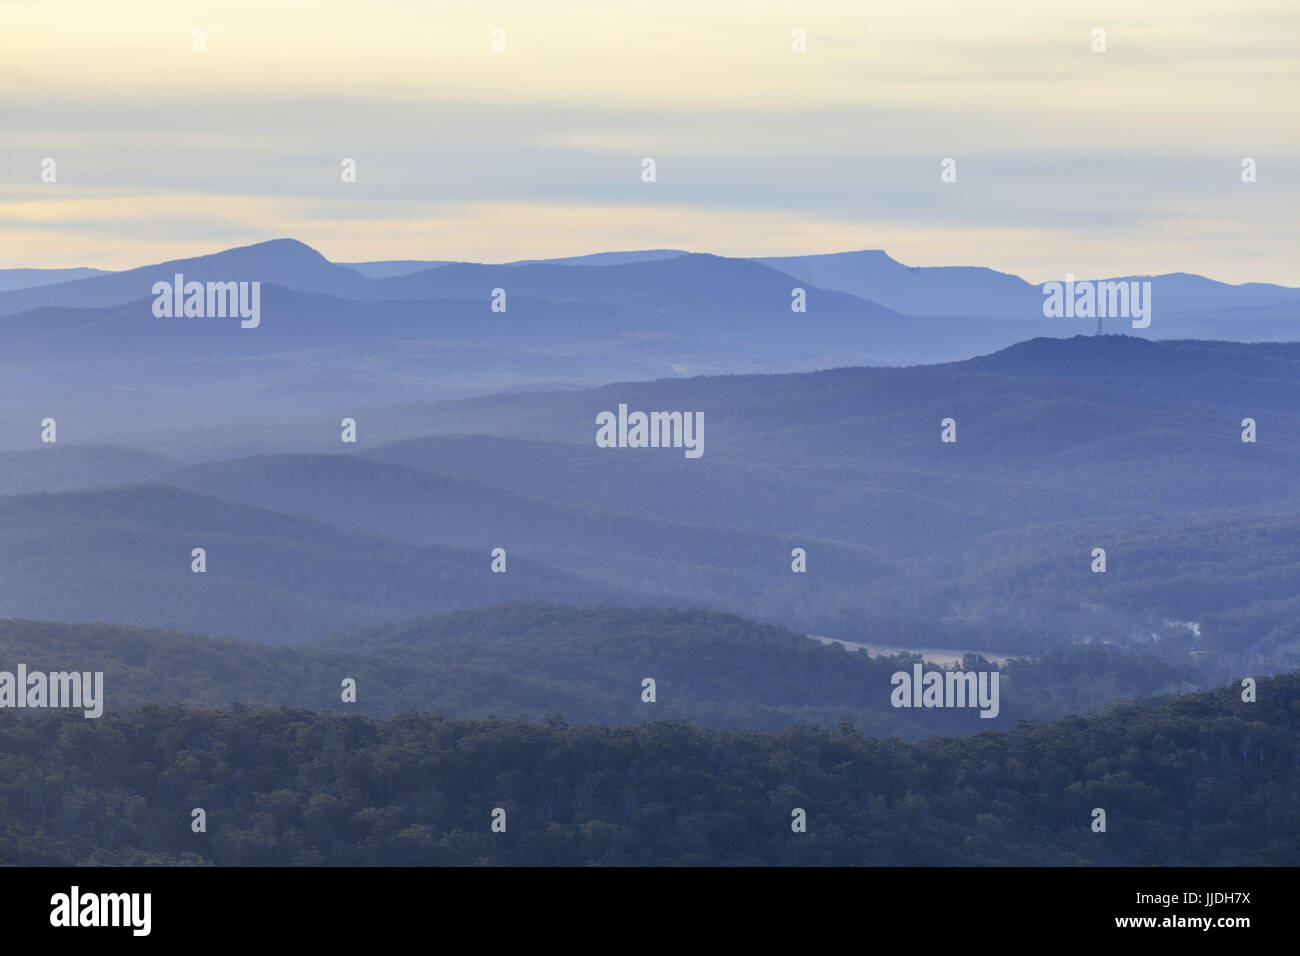 Beautiful forested hills fading into the background in muted colors with copy space Stock Photo